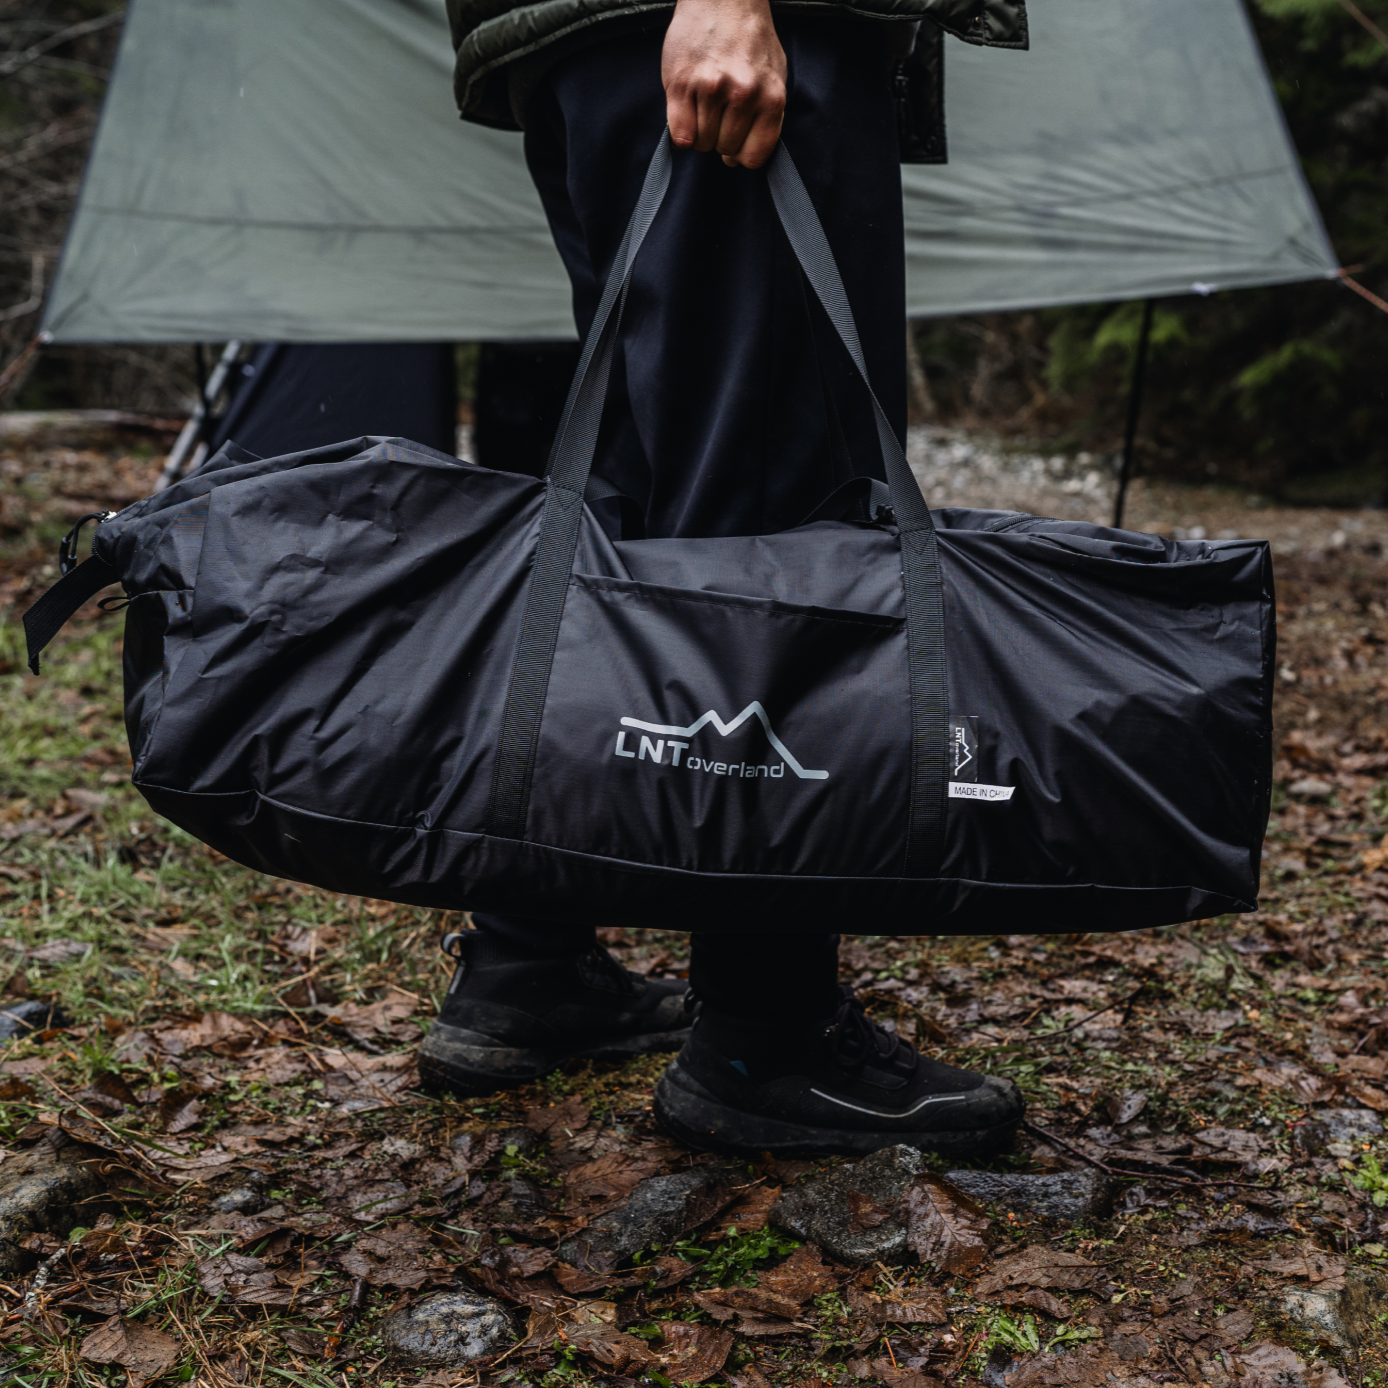 LNT Overland's ES Awning Screen is in a carry bag and a person is holding it easily.